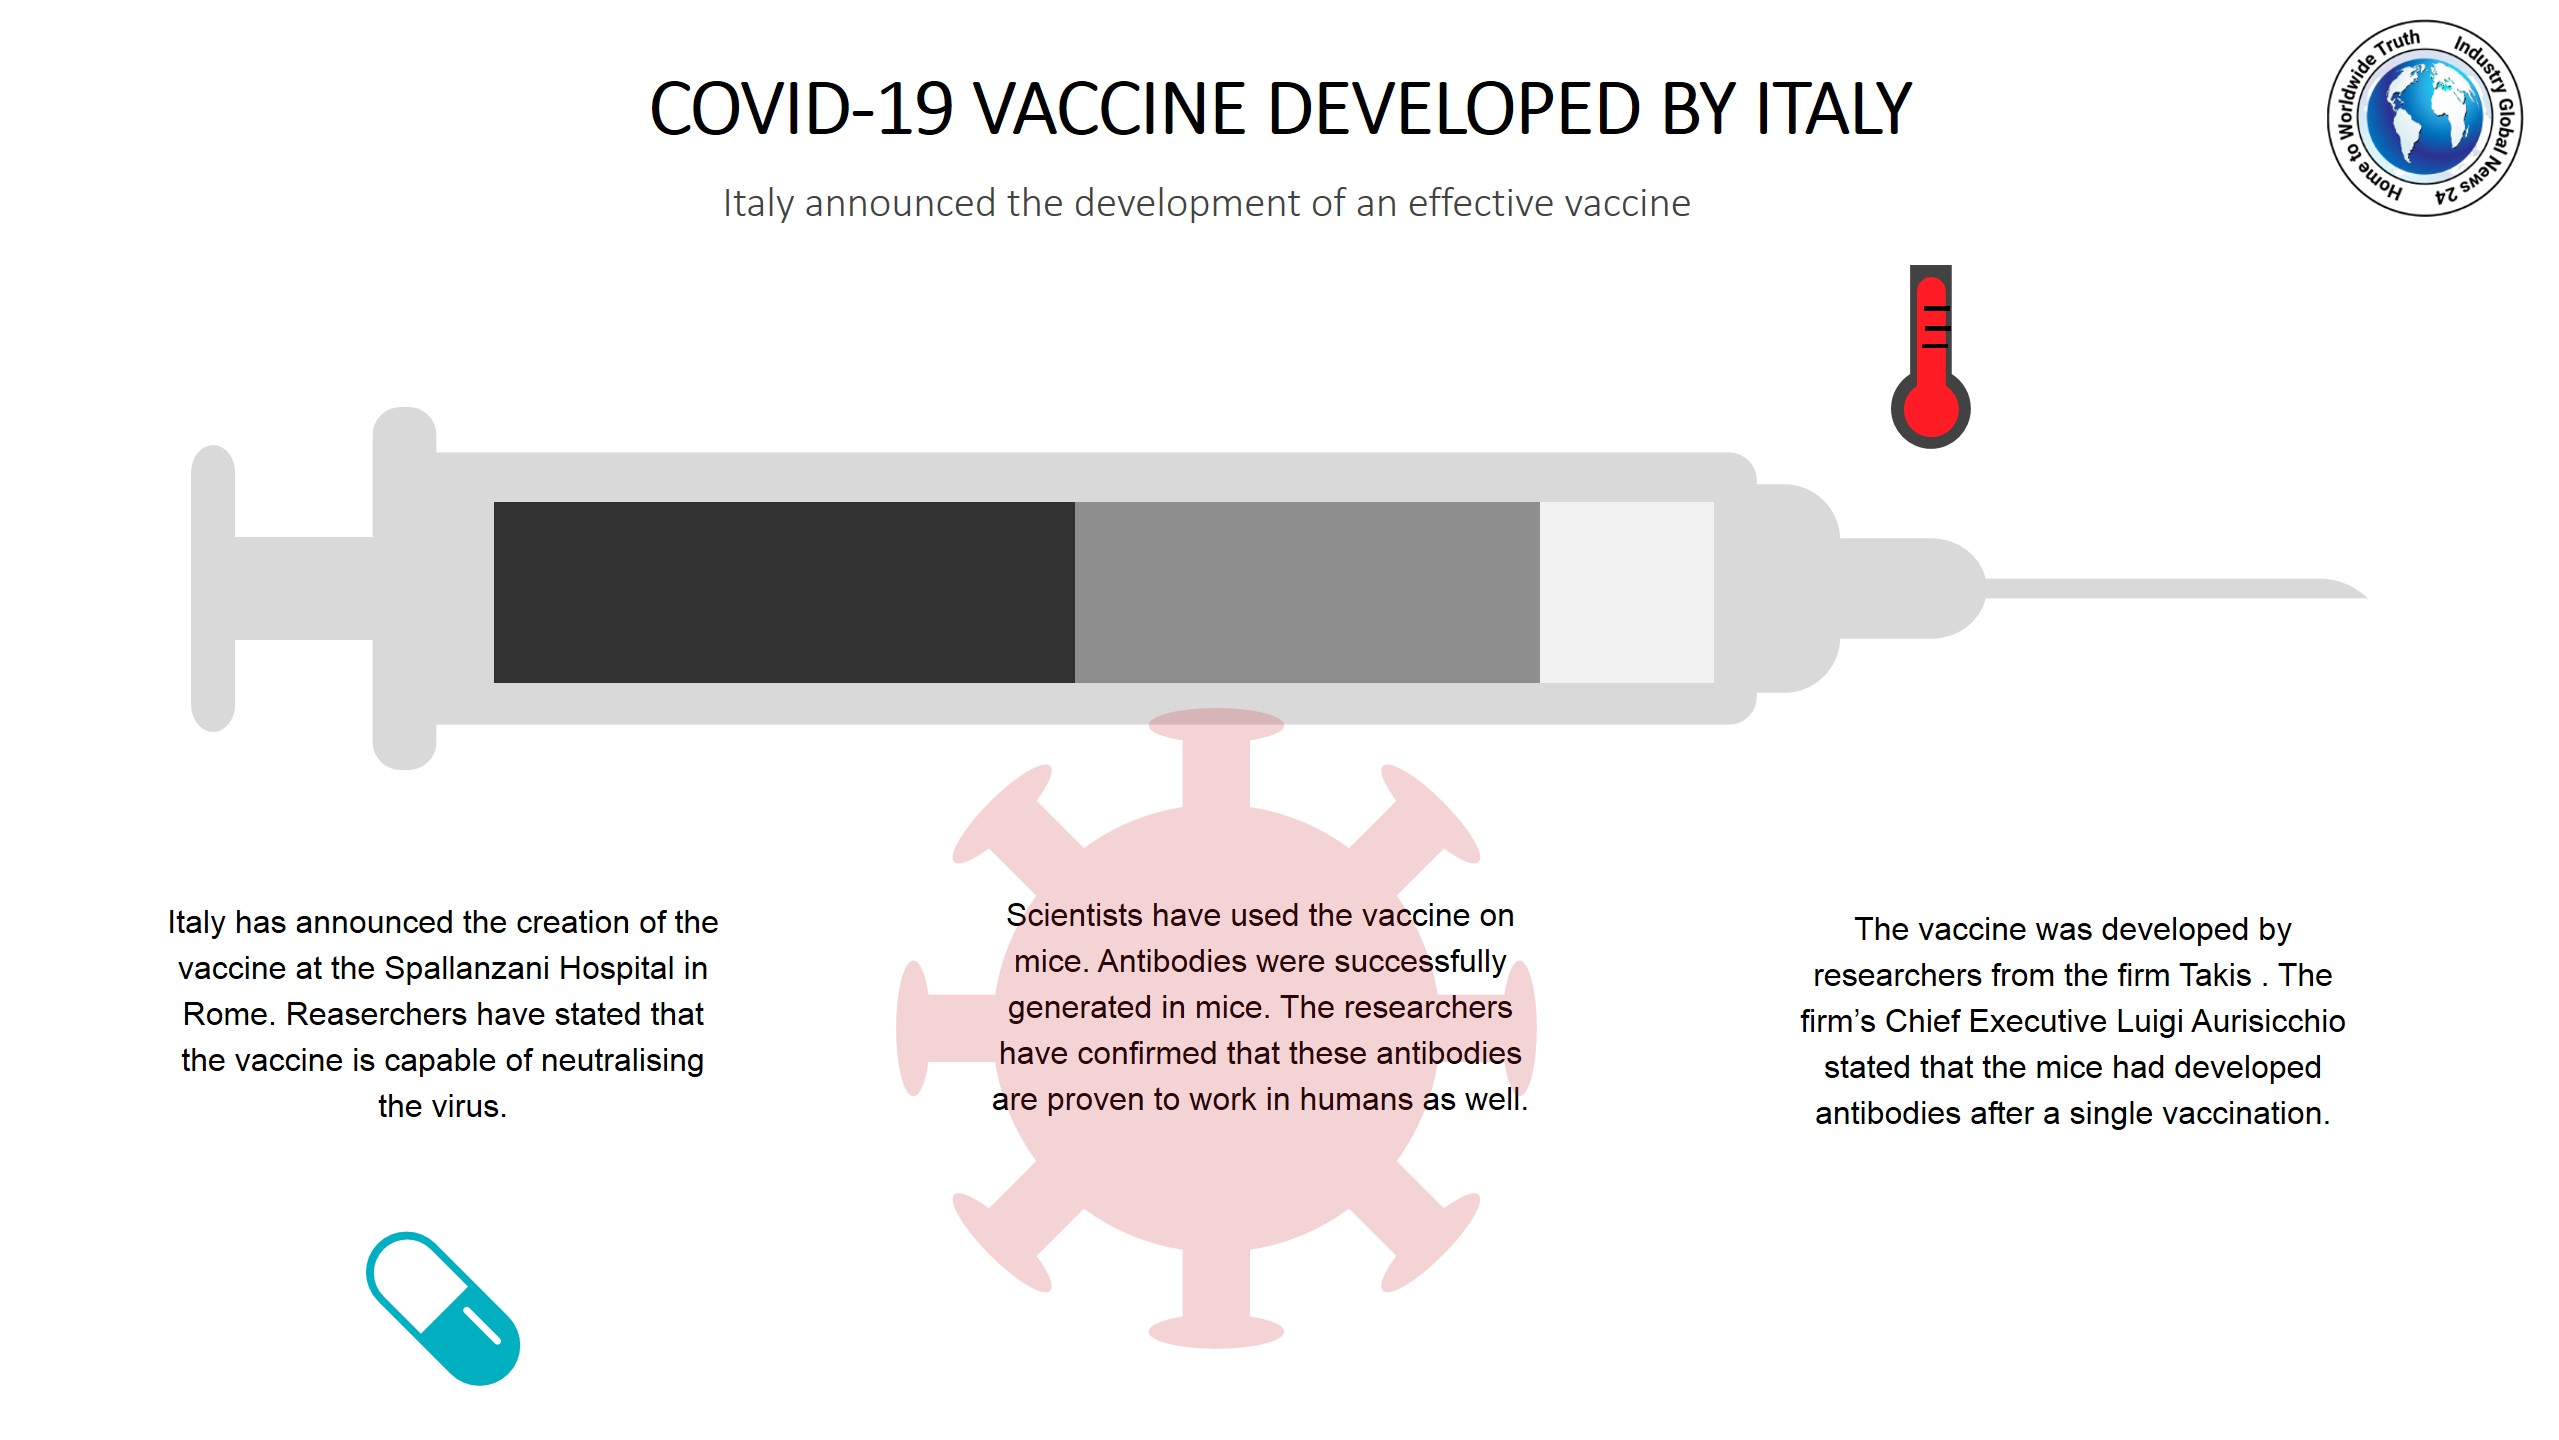 COVID-19 vaccine developed by Italy